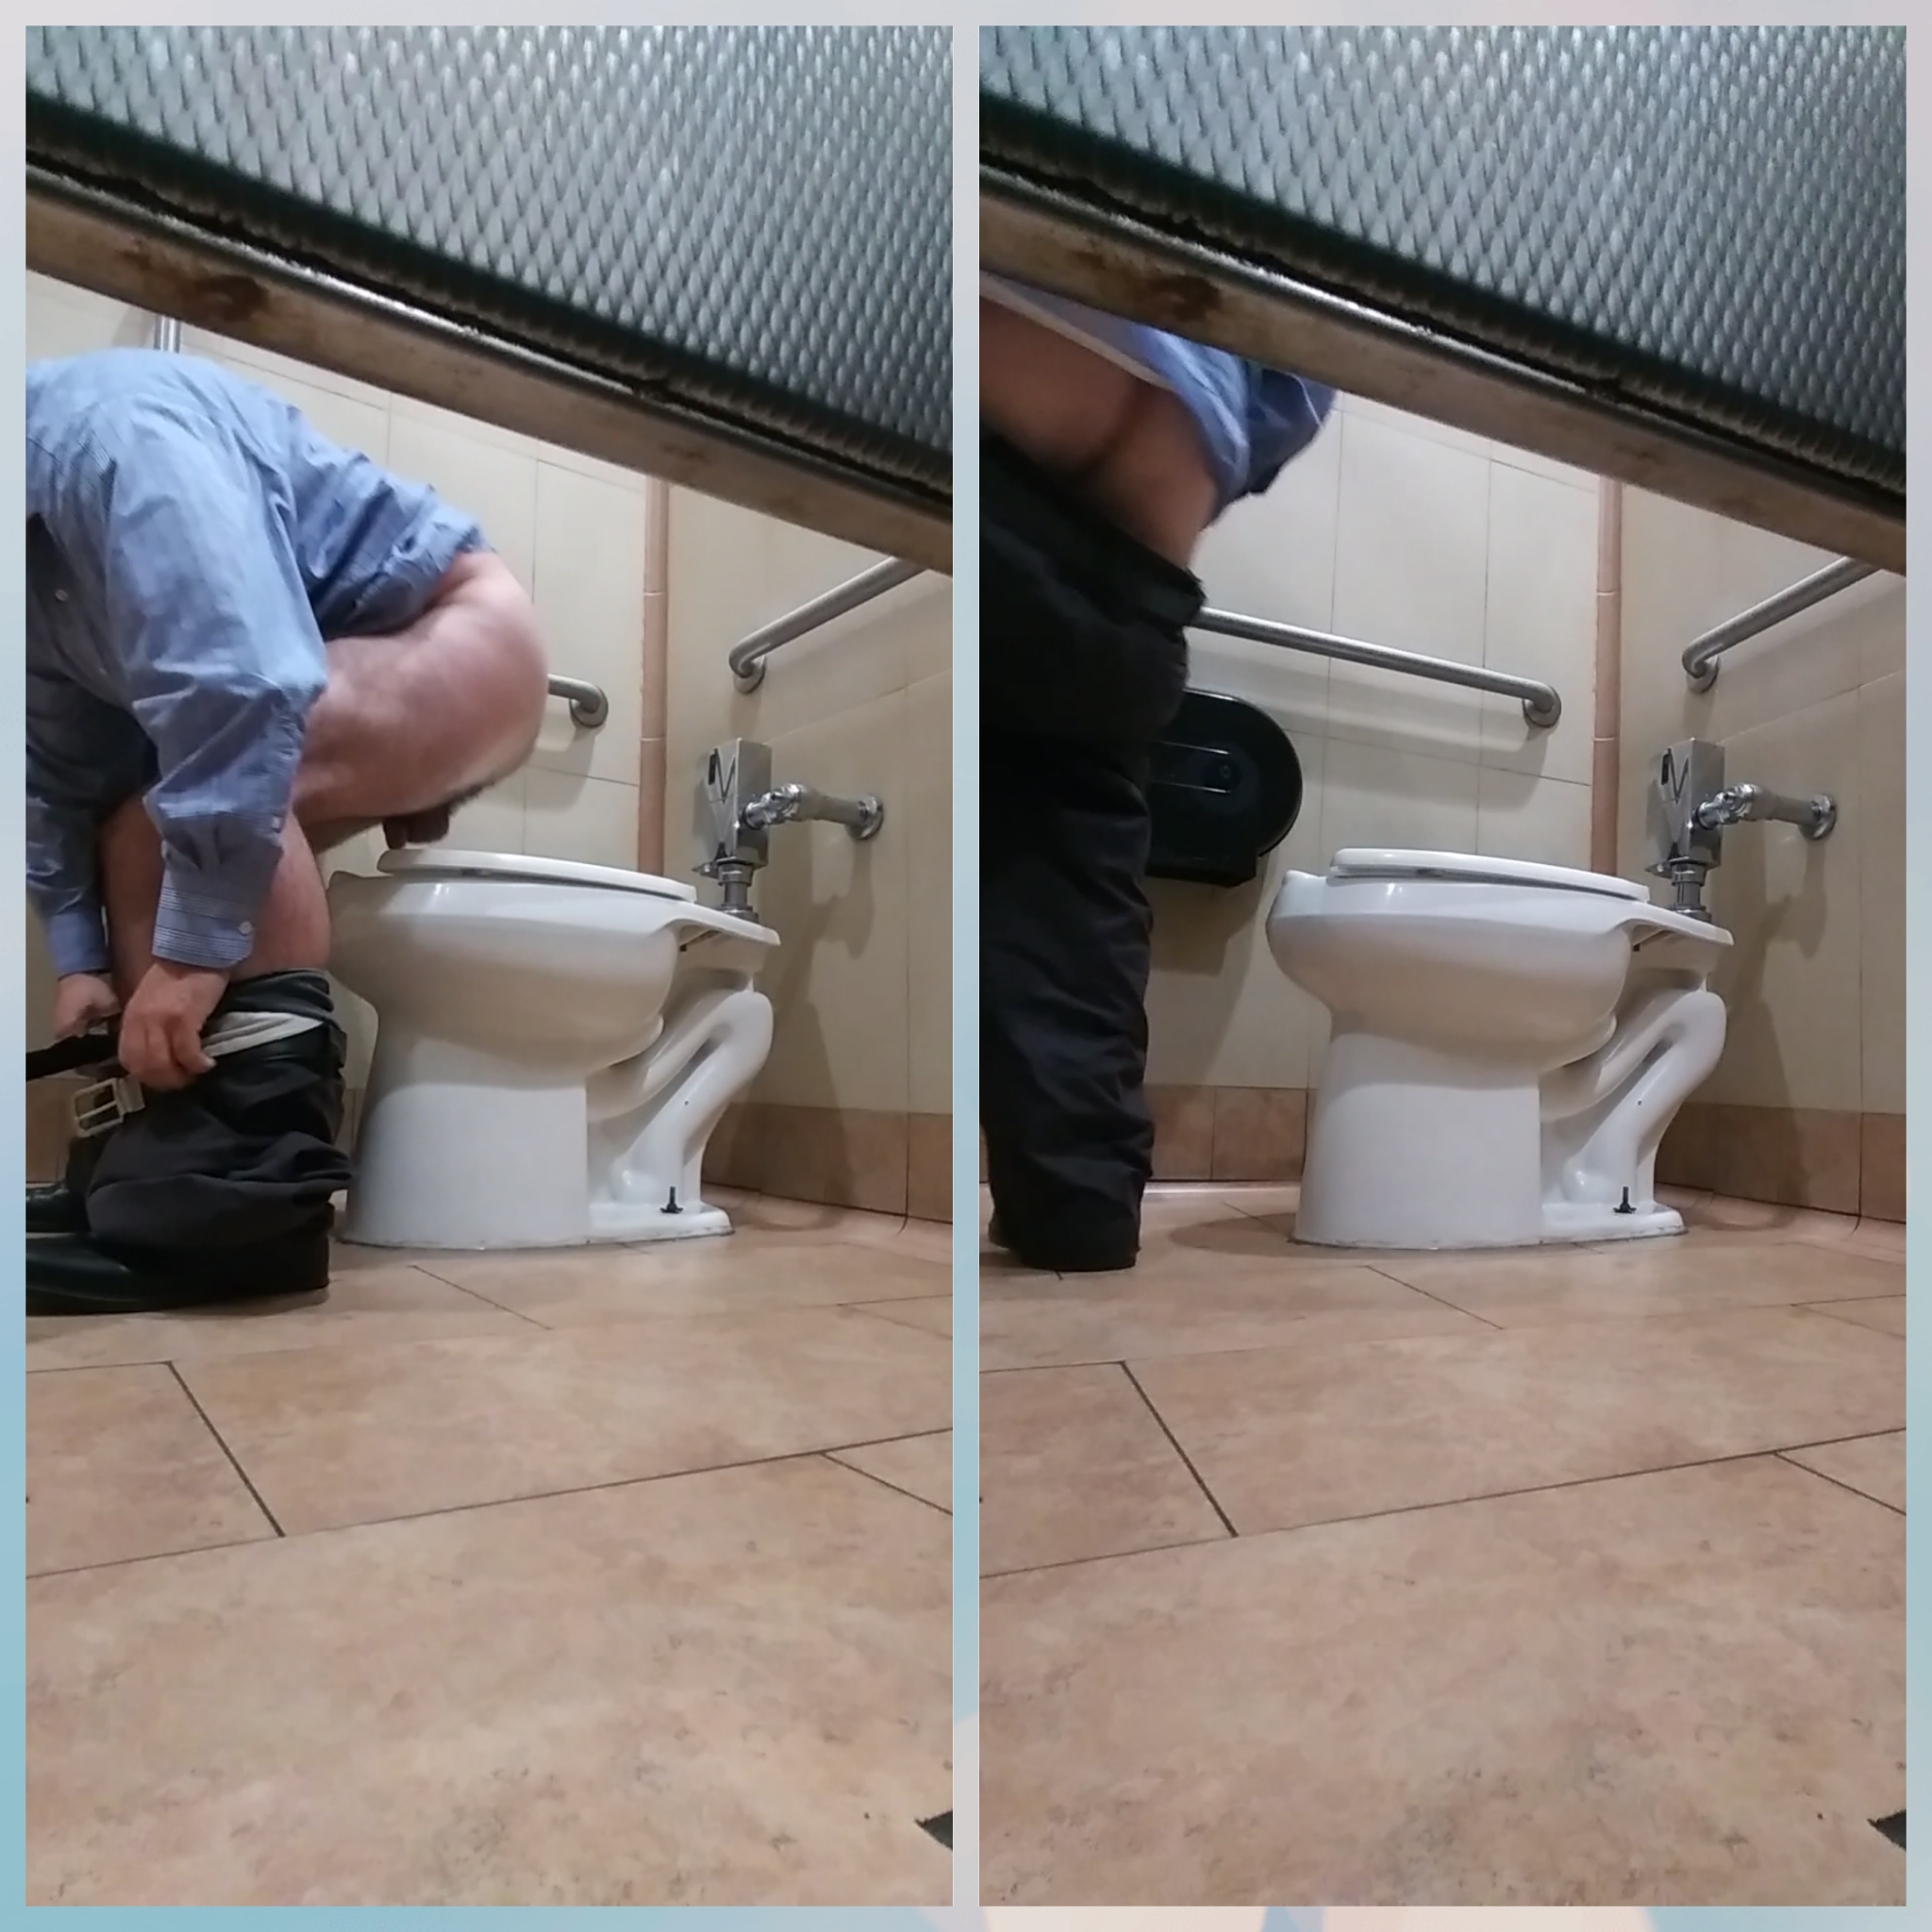 Church guy wipes picture